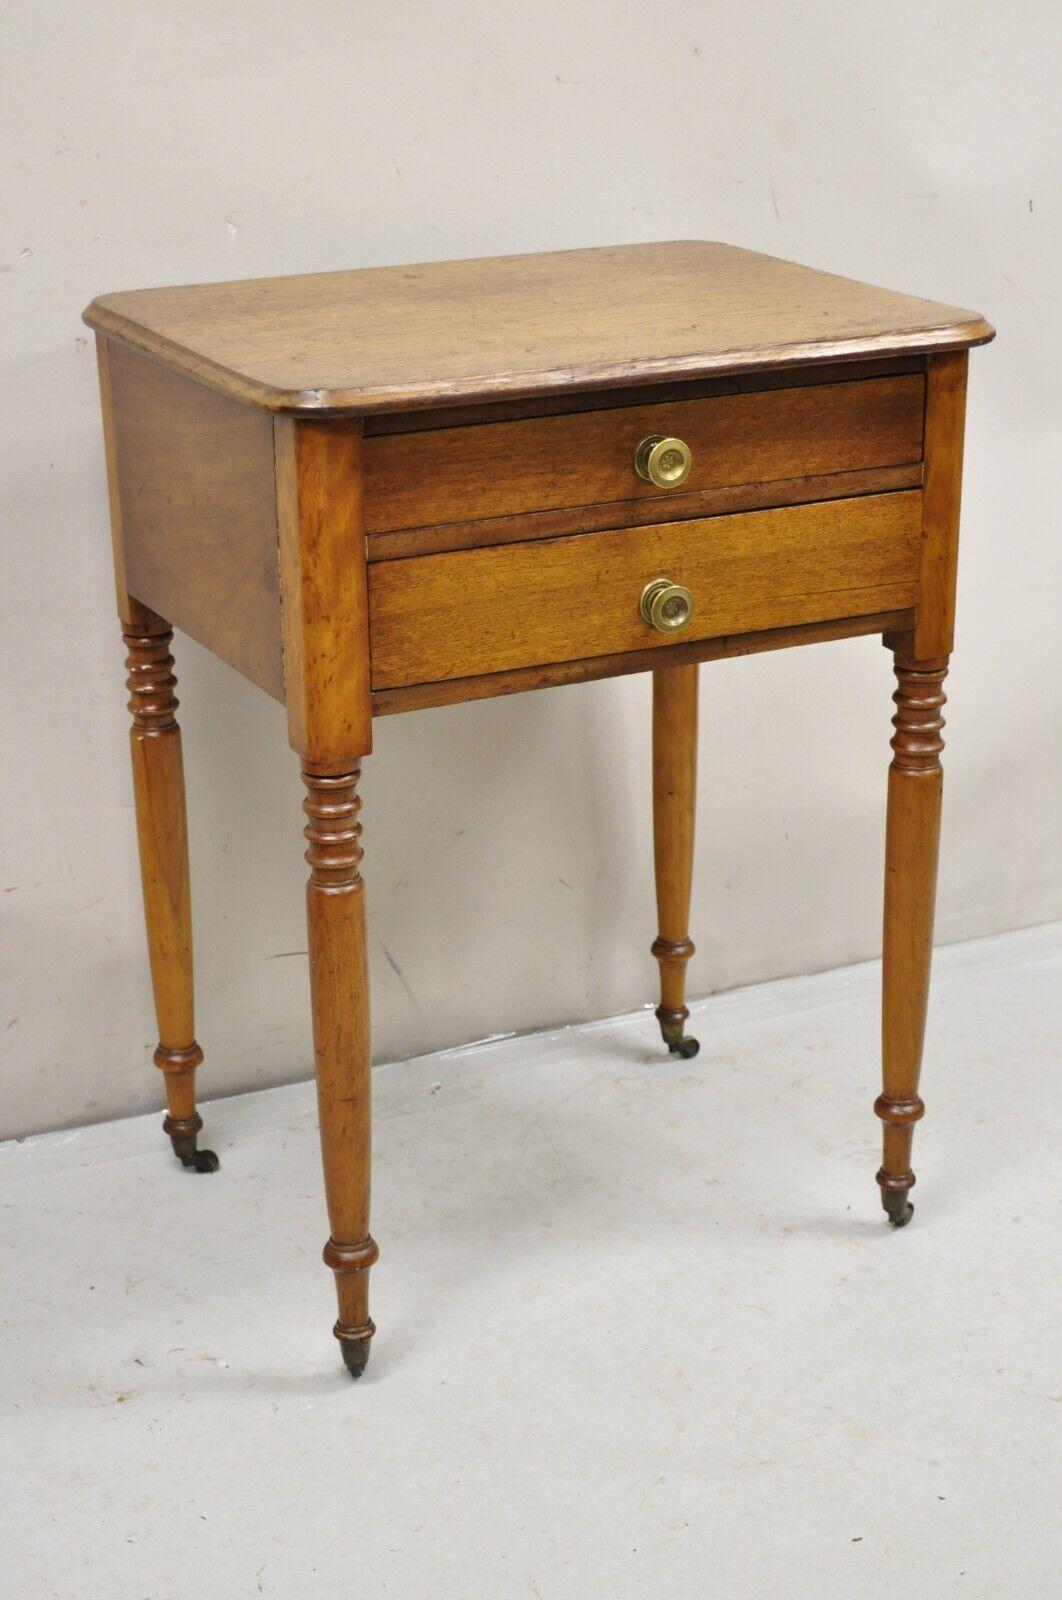 Antique American Colonial Sheraton Mahogany 2 Drawer Nightstand Bedside Table. Item featured has 2 hand dovetailed drawers, brass hardware, turned carved legs, brass rolling casters, beautiful wood grain, very nice antique item. Circa Mid 1800s